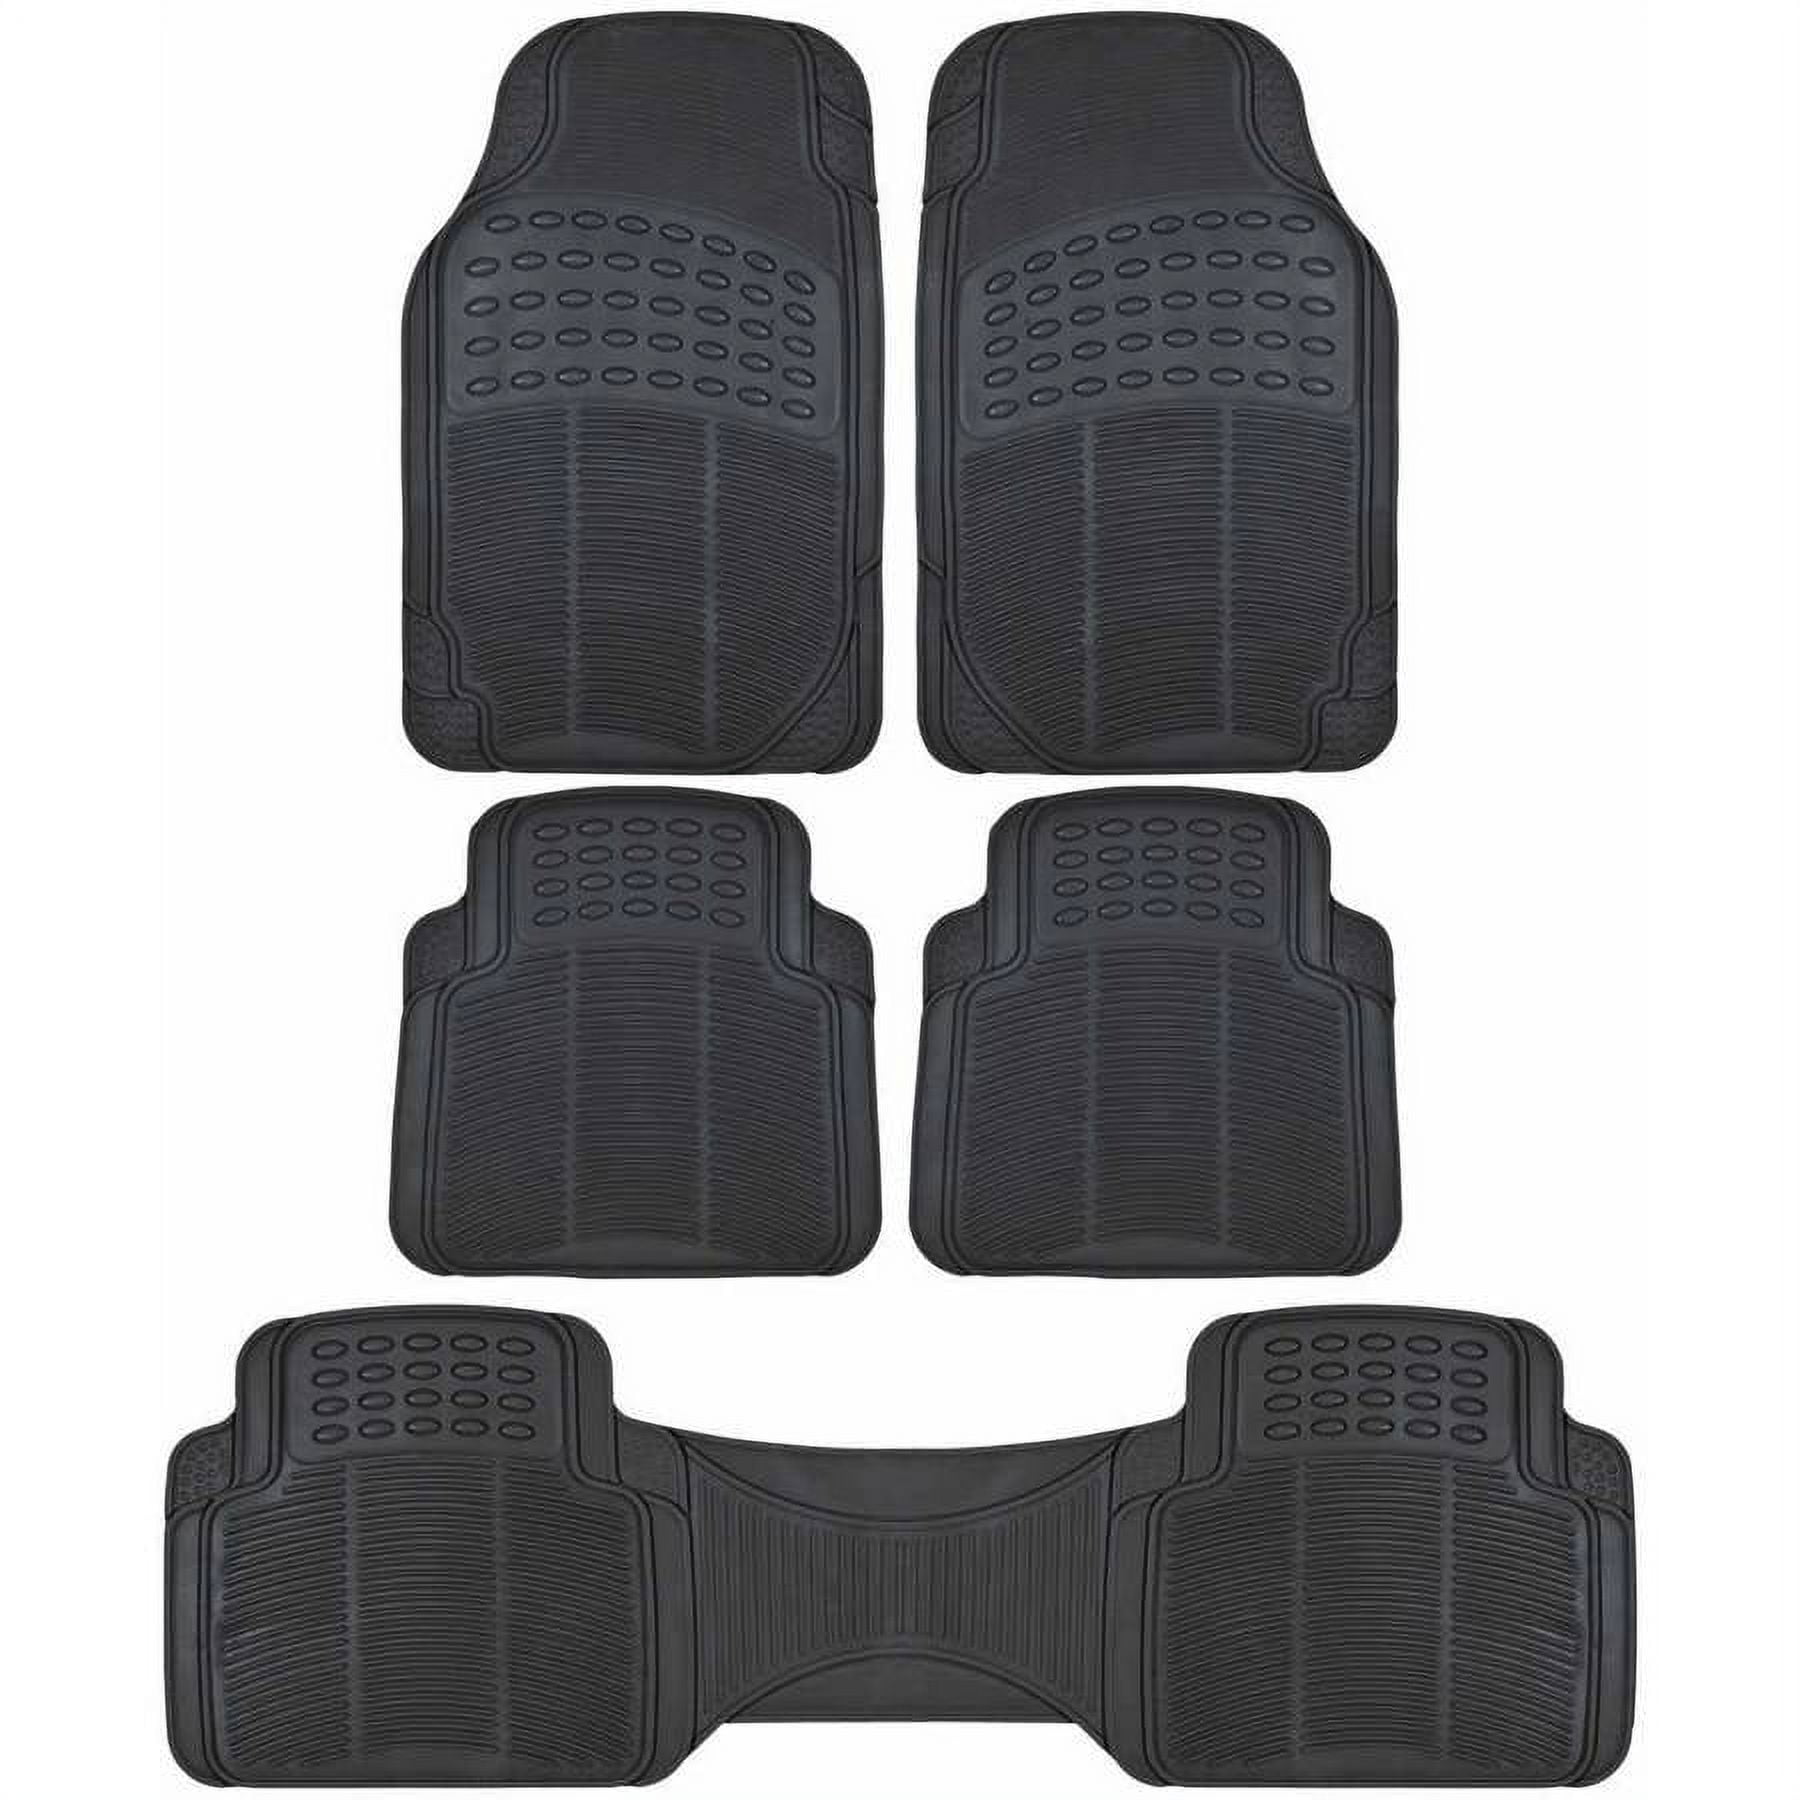 BDK Row Car Floor Mats for SUV and Van, Heavy Duty Rubber Mats and Liner,  Black Beige Gray